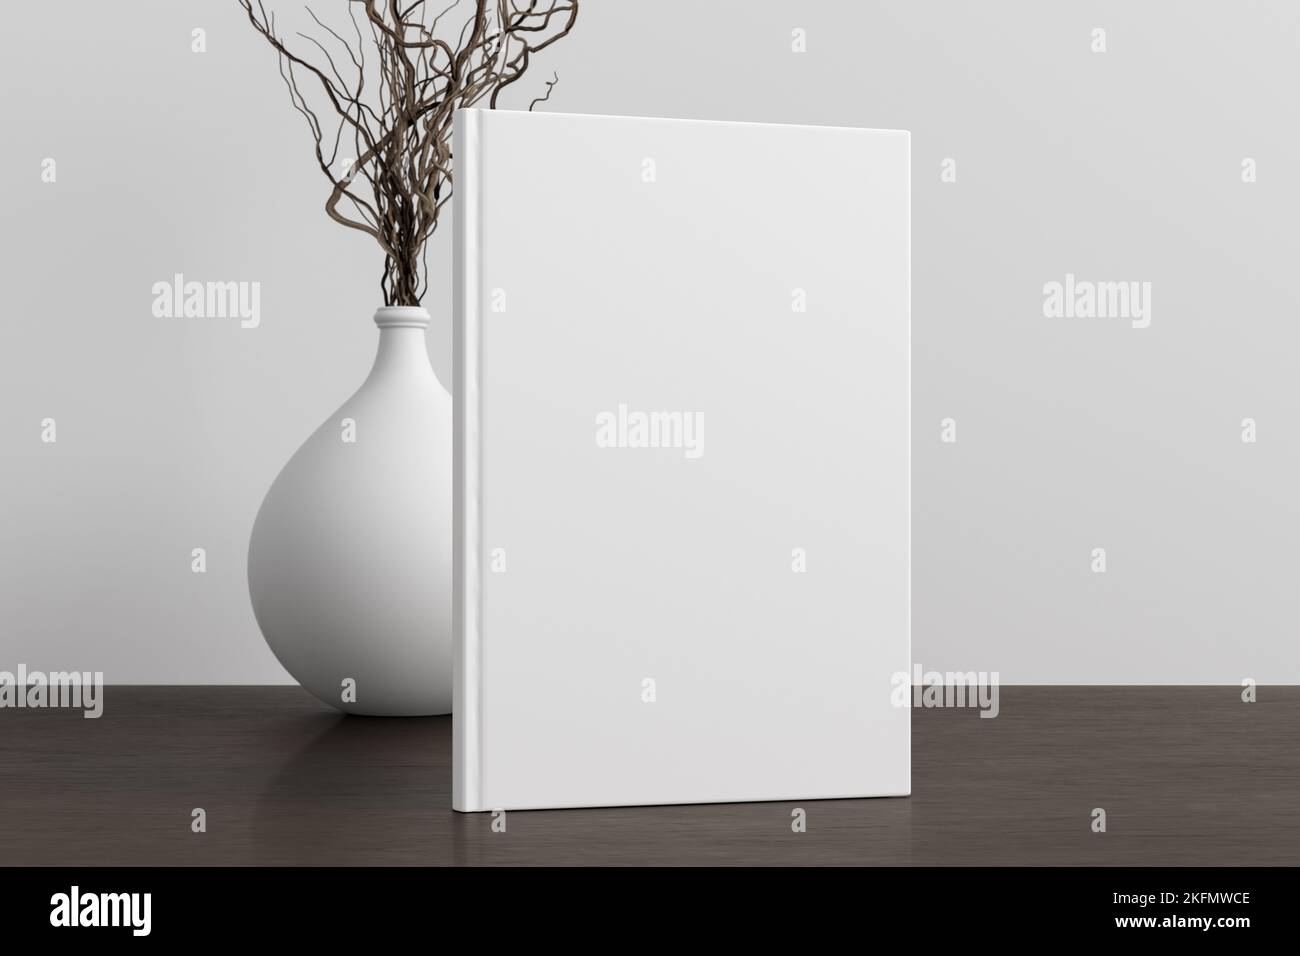 Vertical book cover mock up standing on a dark wooden desk with white wall background Stock Photo